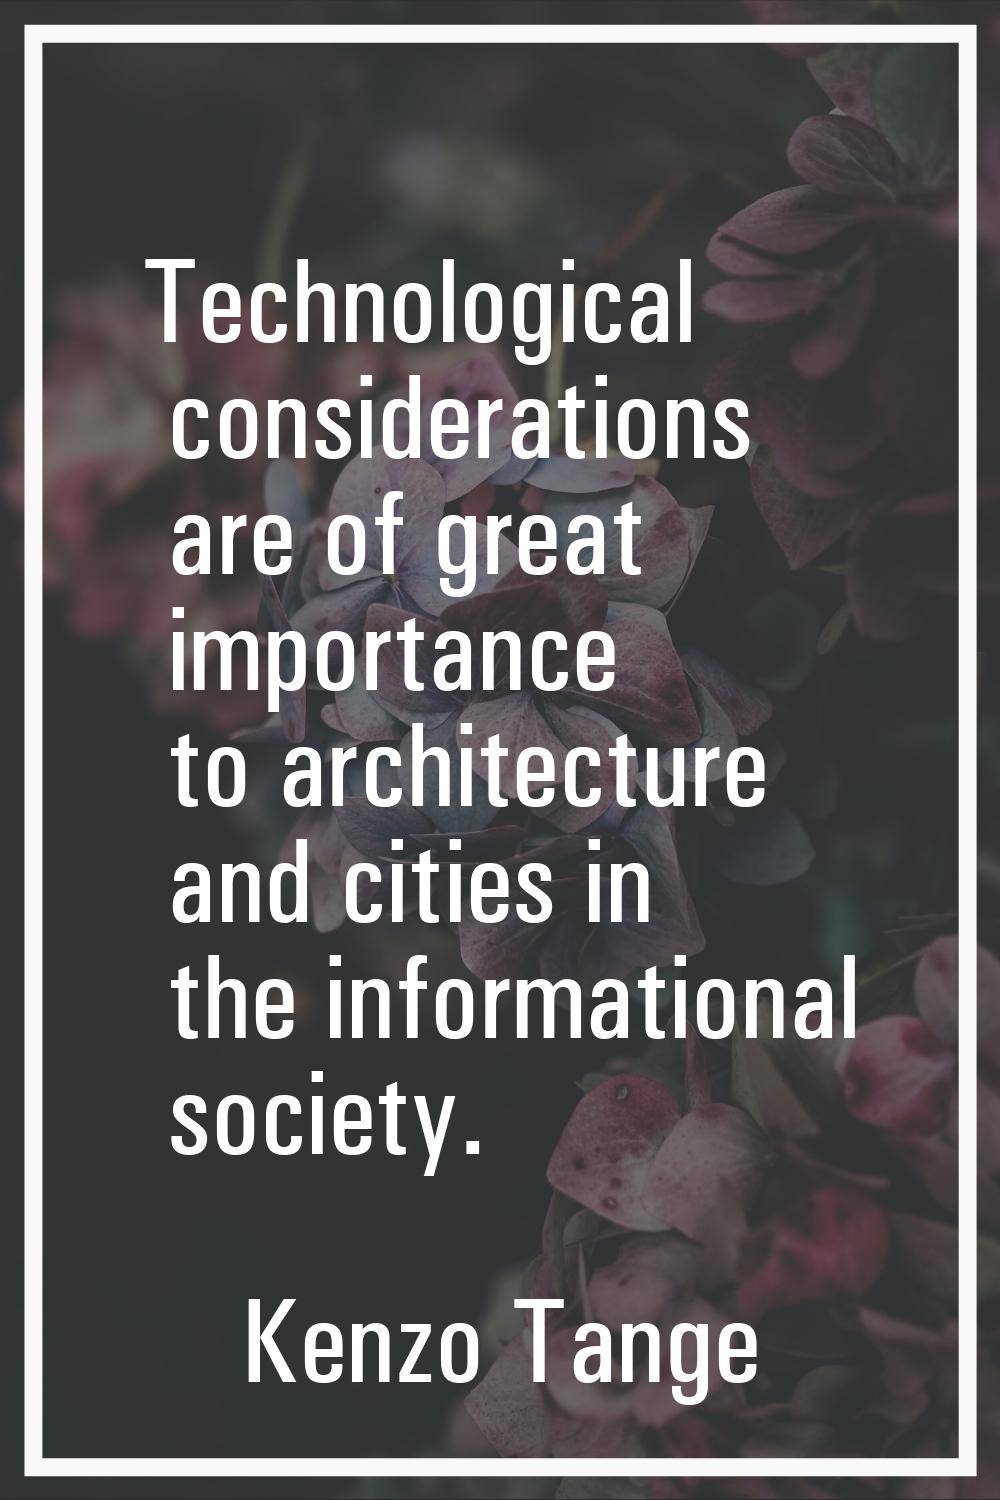 Technological considerations are of great importance to architecture and cities in the informationa